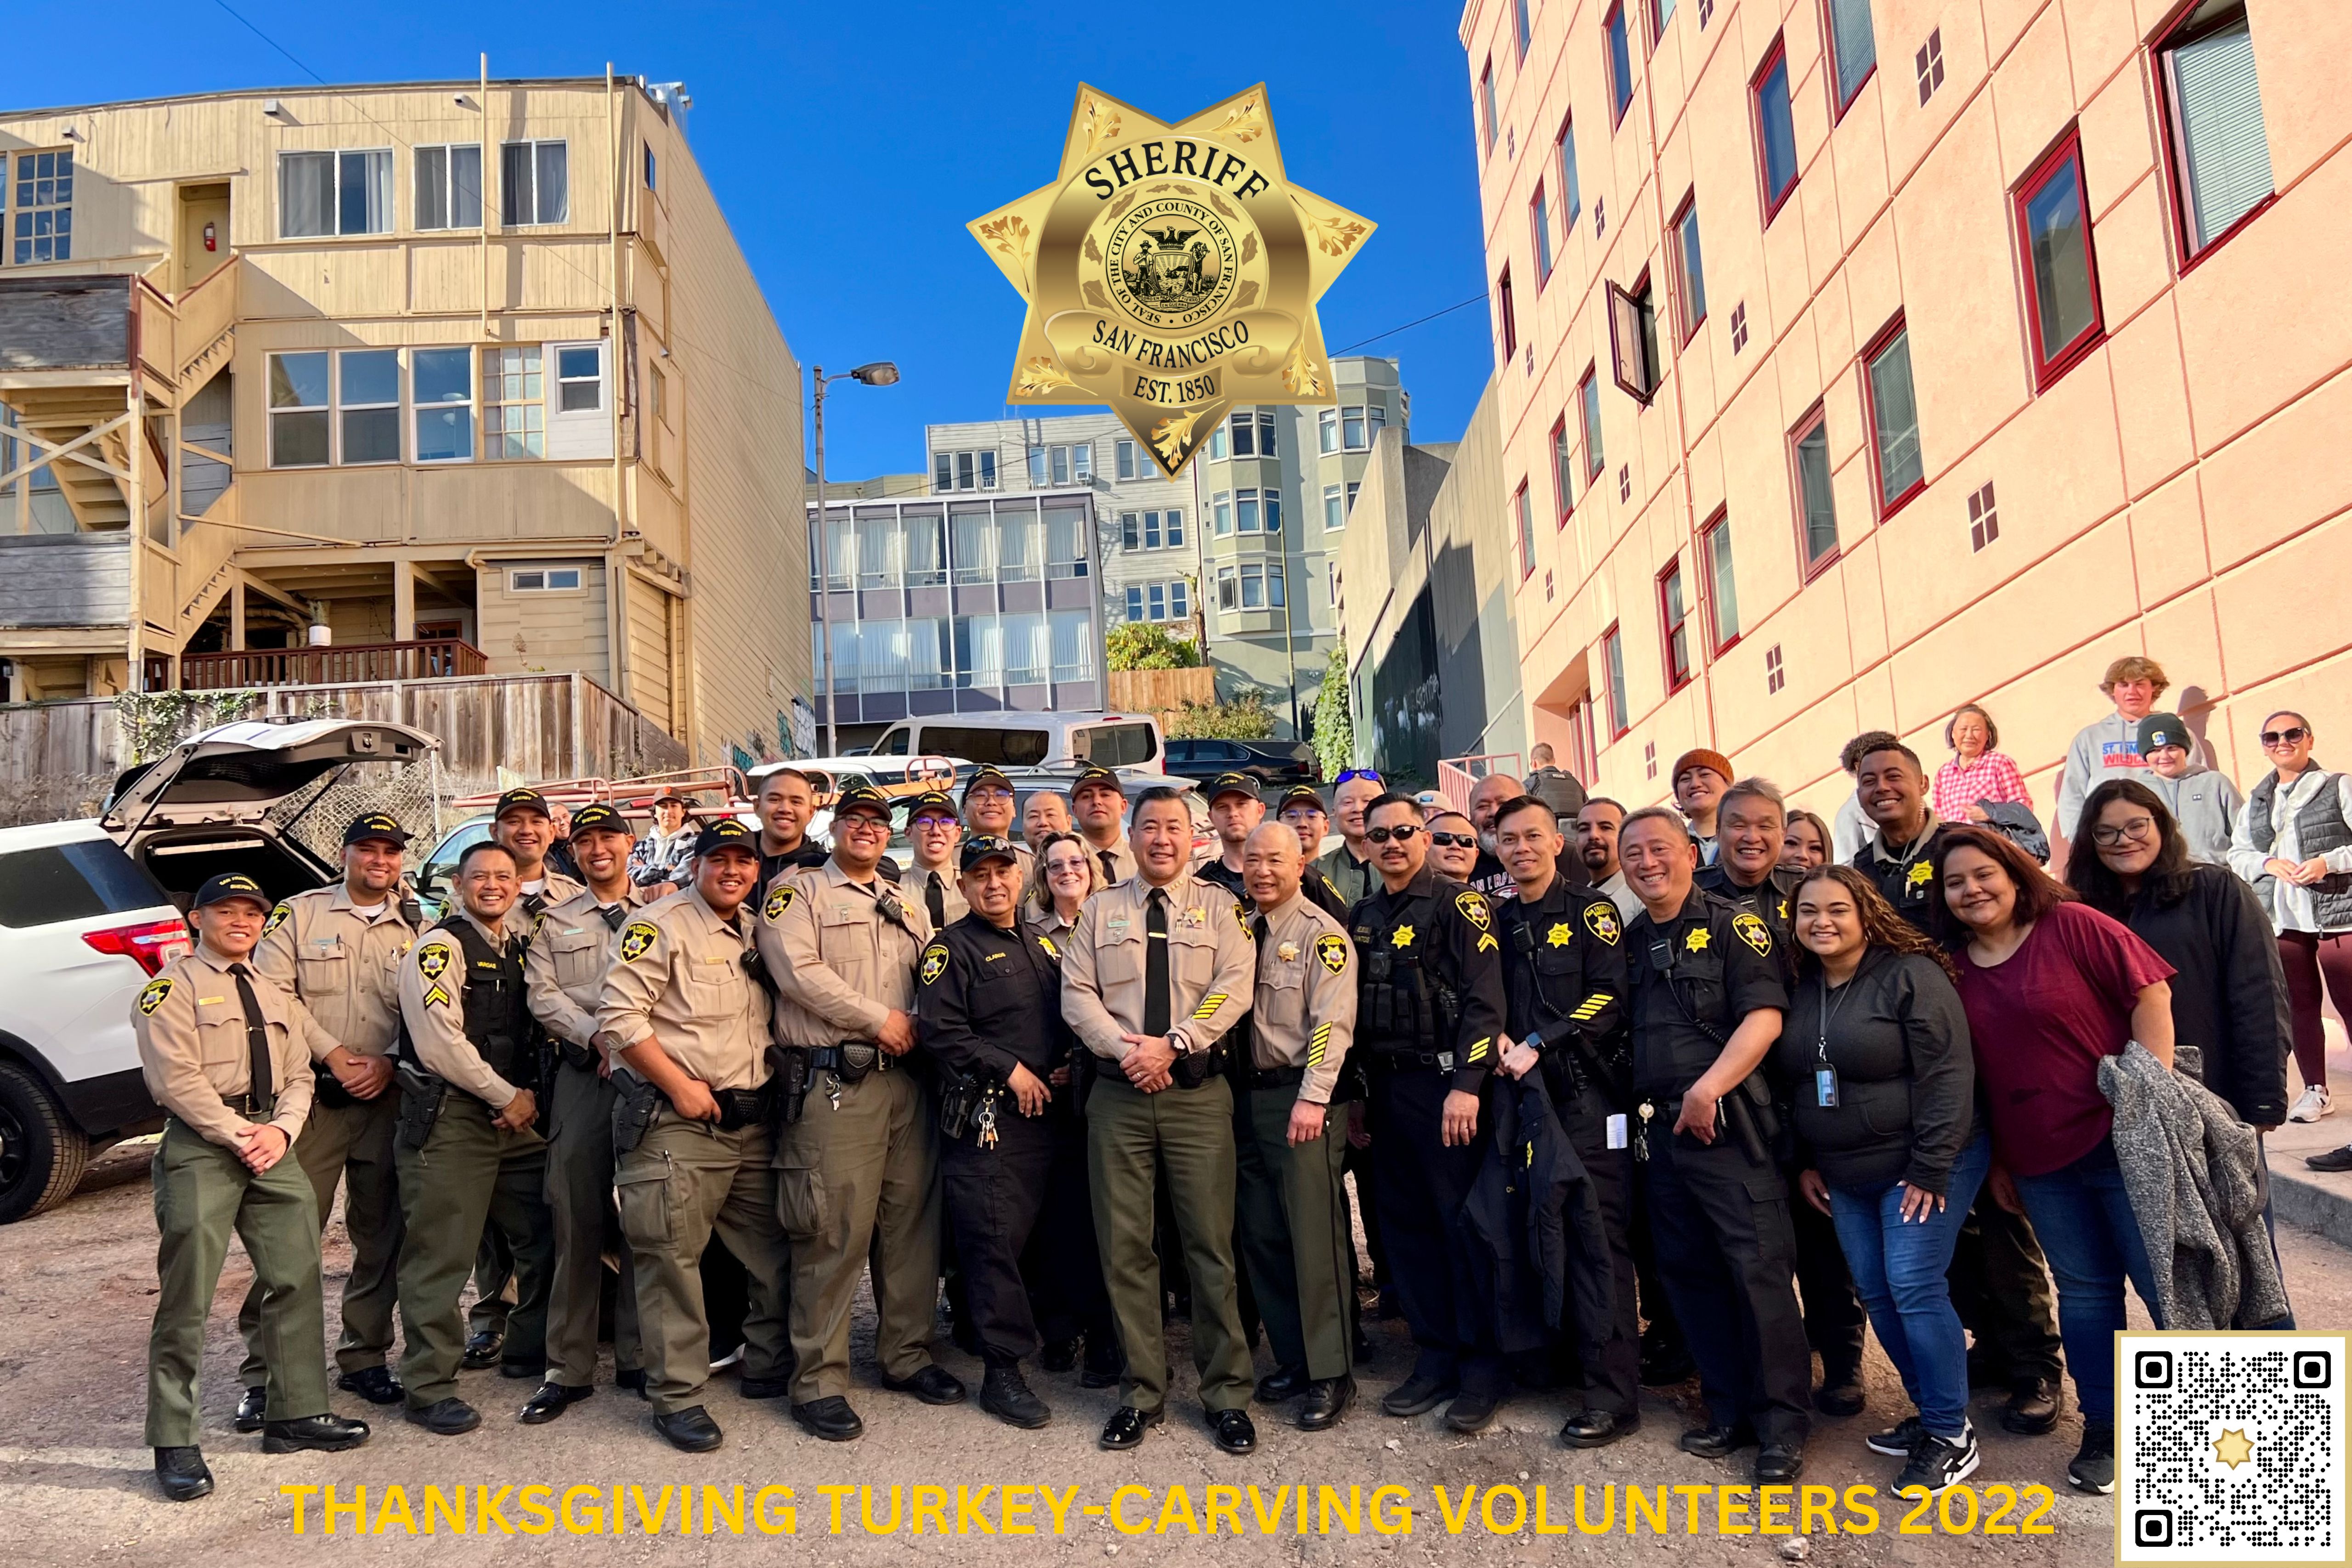 Sheriff's Office staff joined with other agencies to serve Thanksgiving meals to San Francisco residents. If you're for a new exciting and rewarding career, we're hiring!